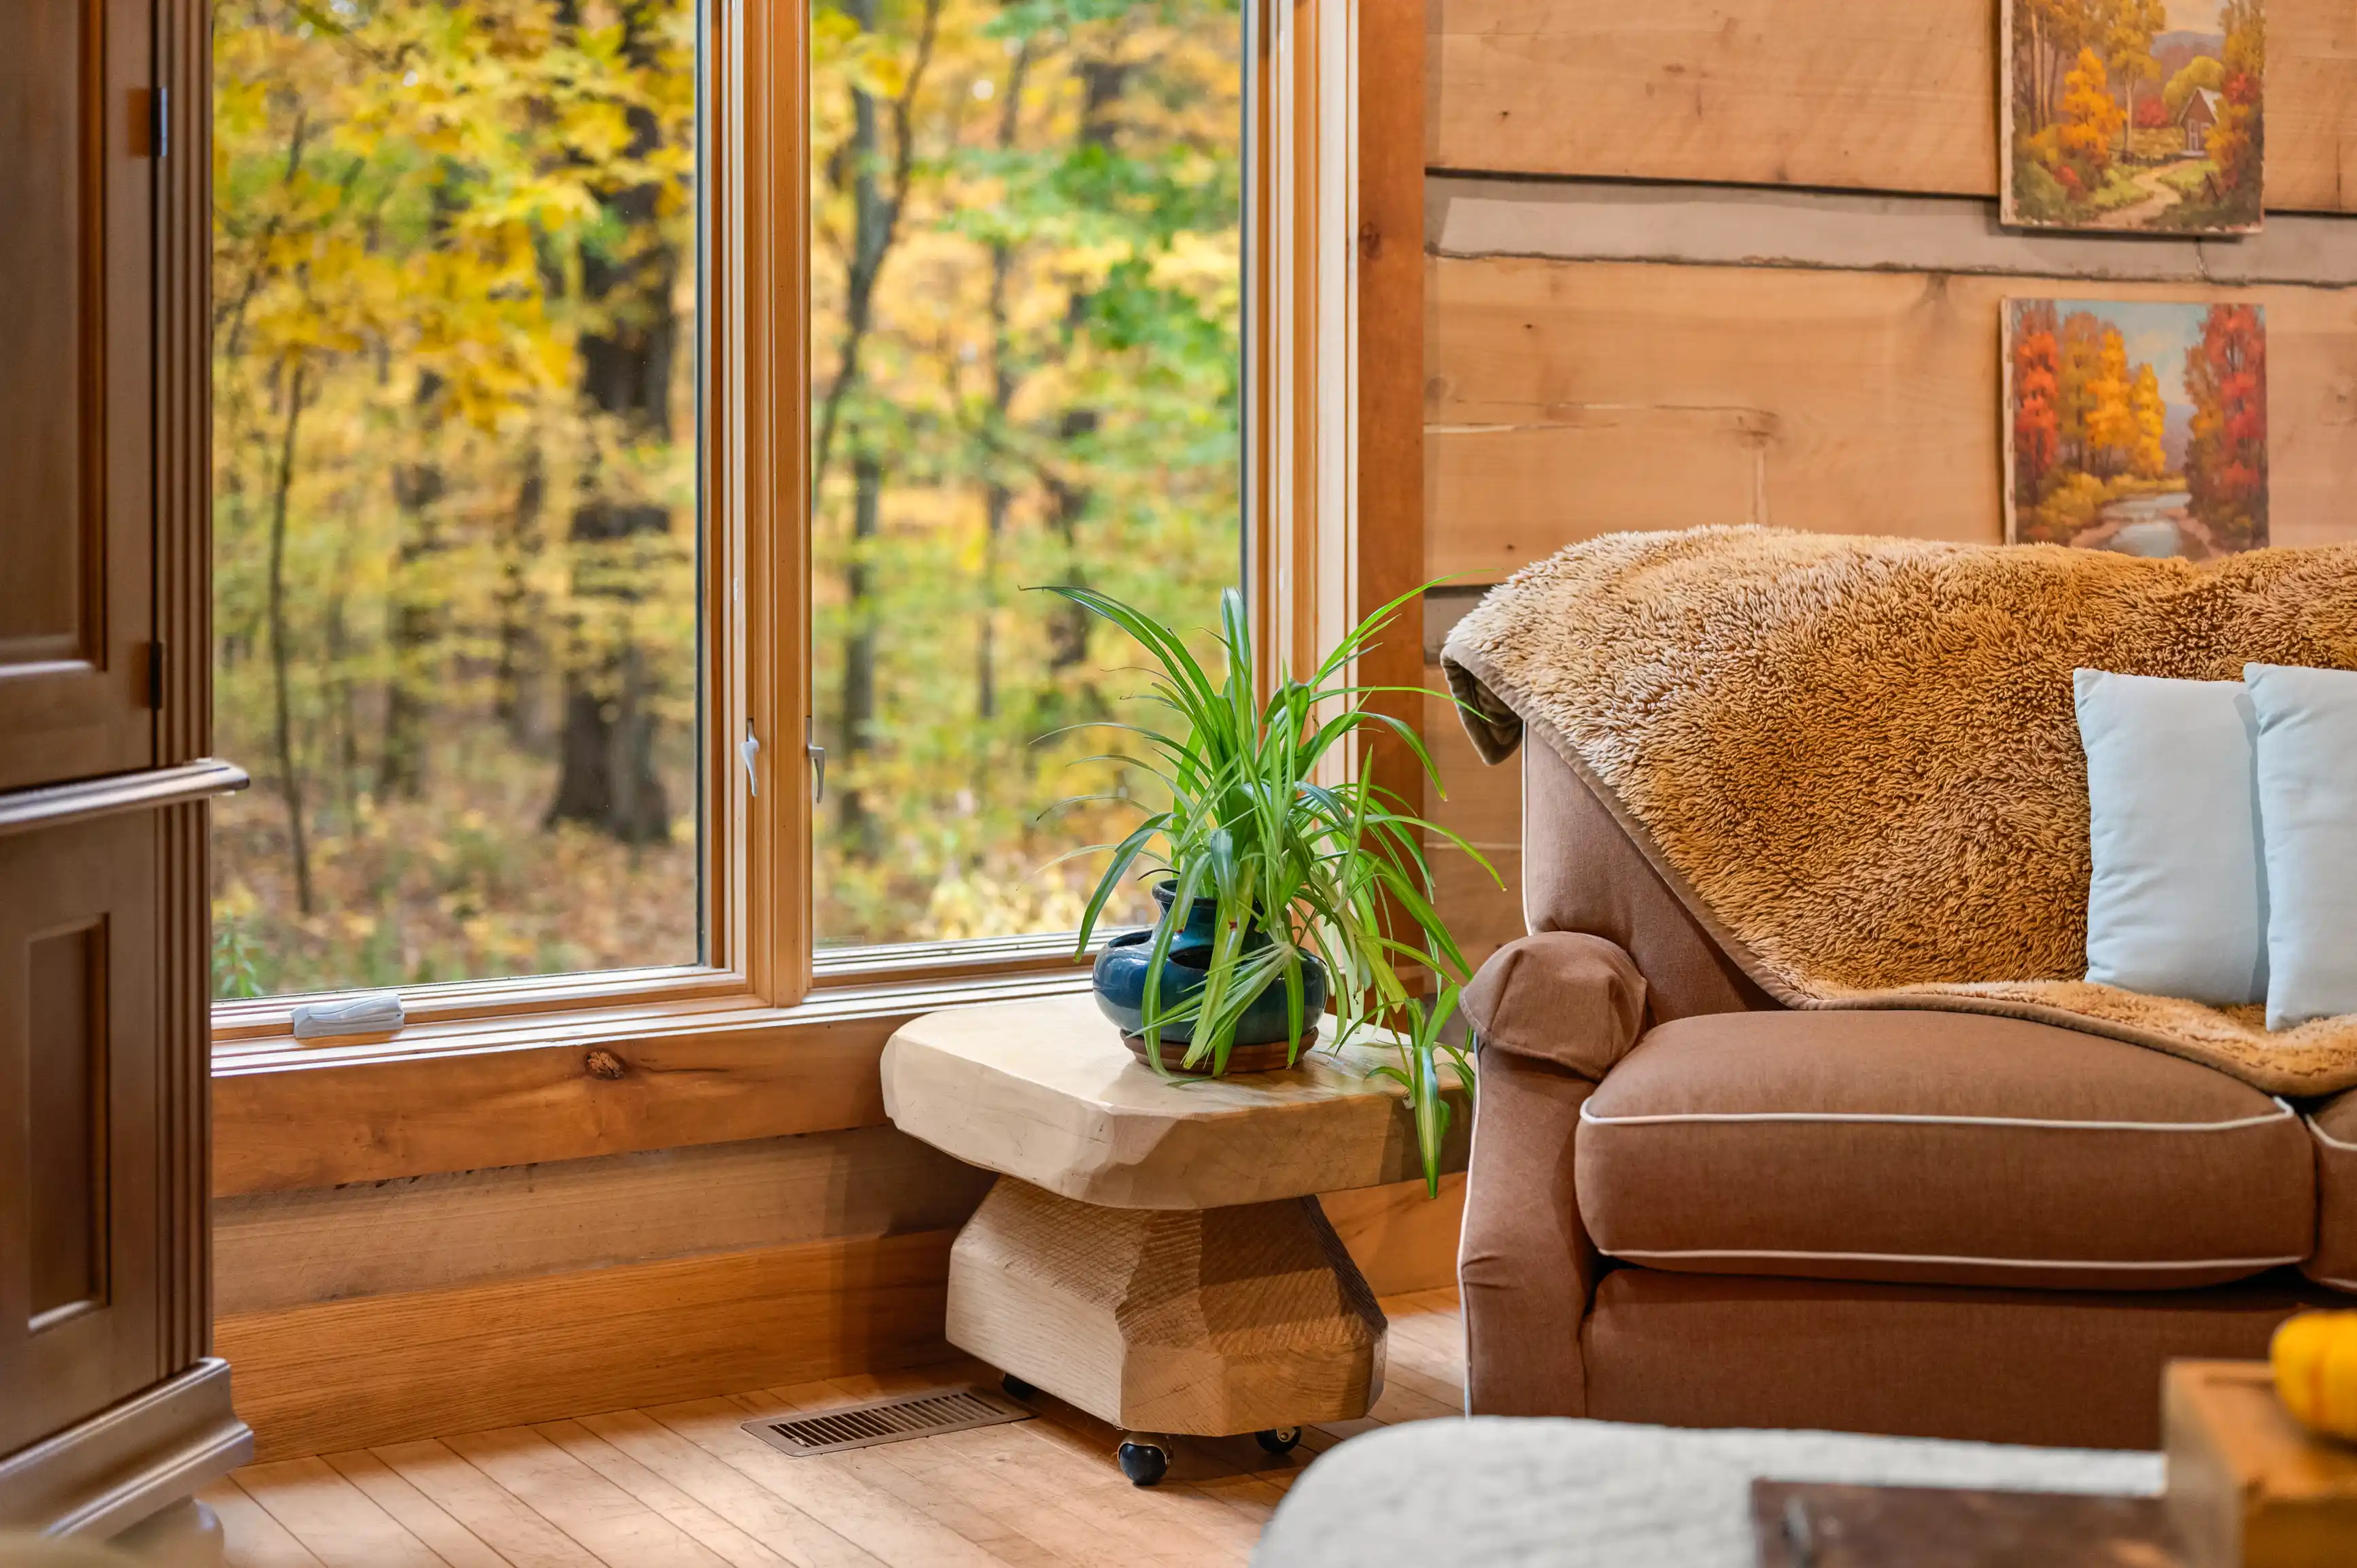 Cozy wooden cabin interior with a plush sofa, decorative pillows, a potted plant on a side table, and forest view through large windows in autumn.